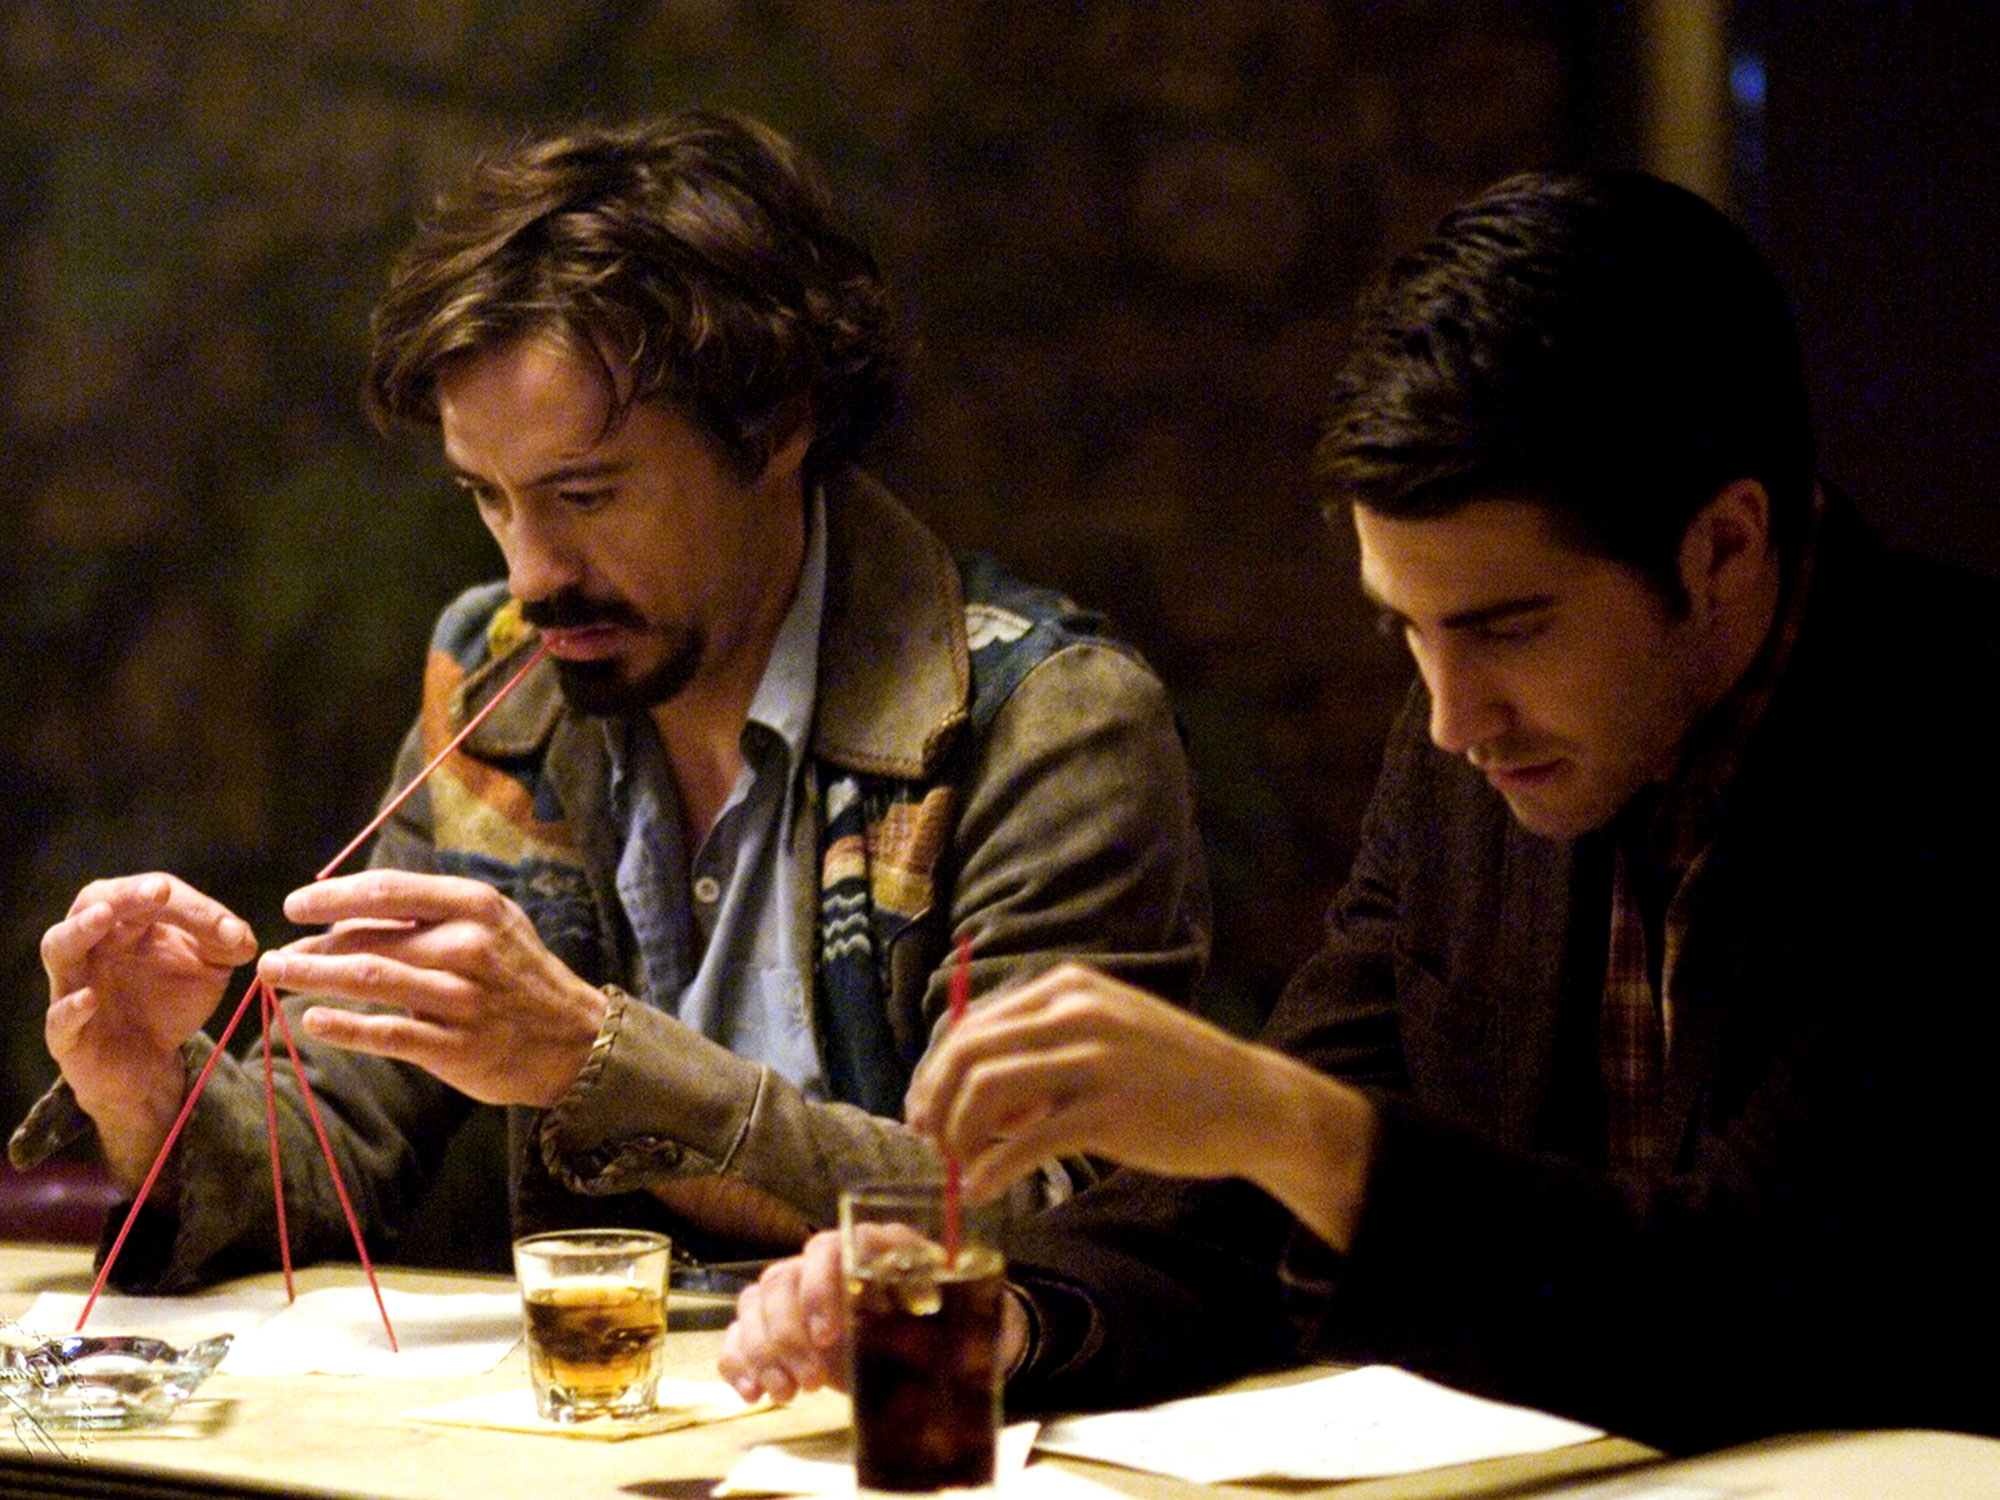 Why Zodiac remains David Fincher’s most puzzling masterpiece2000 x 1500